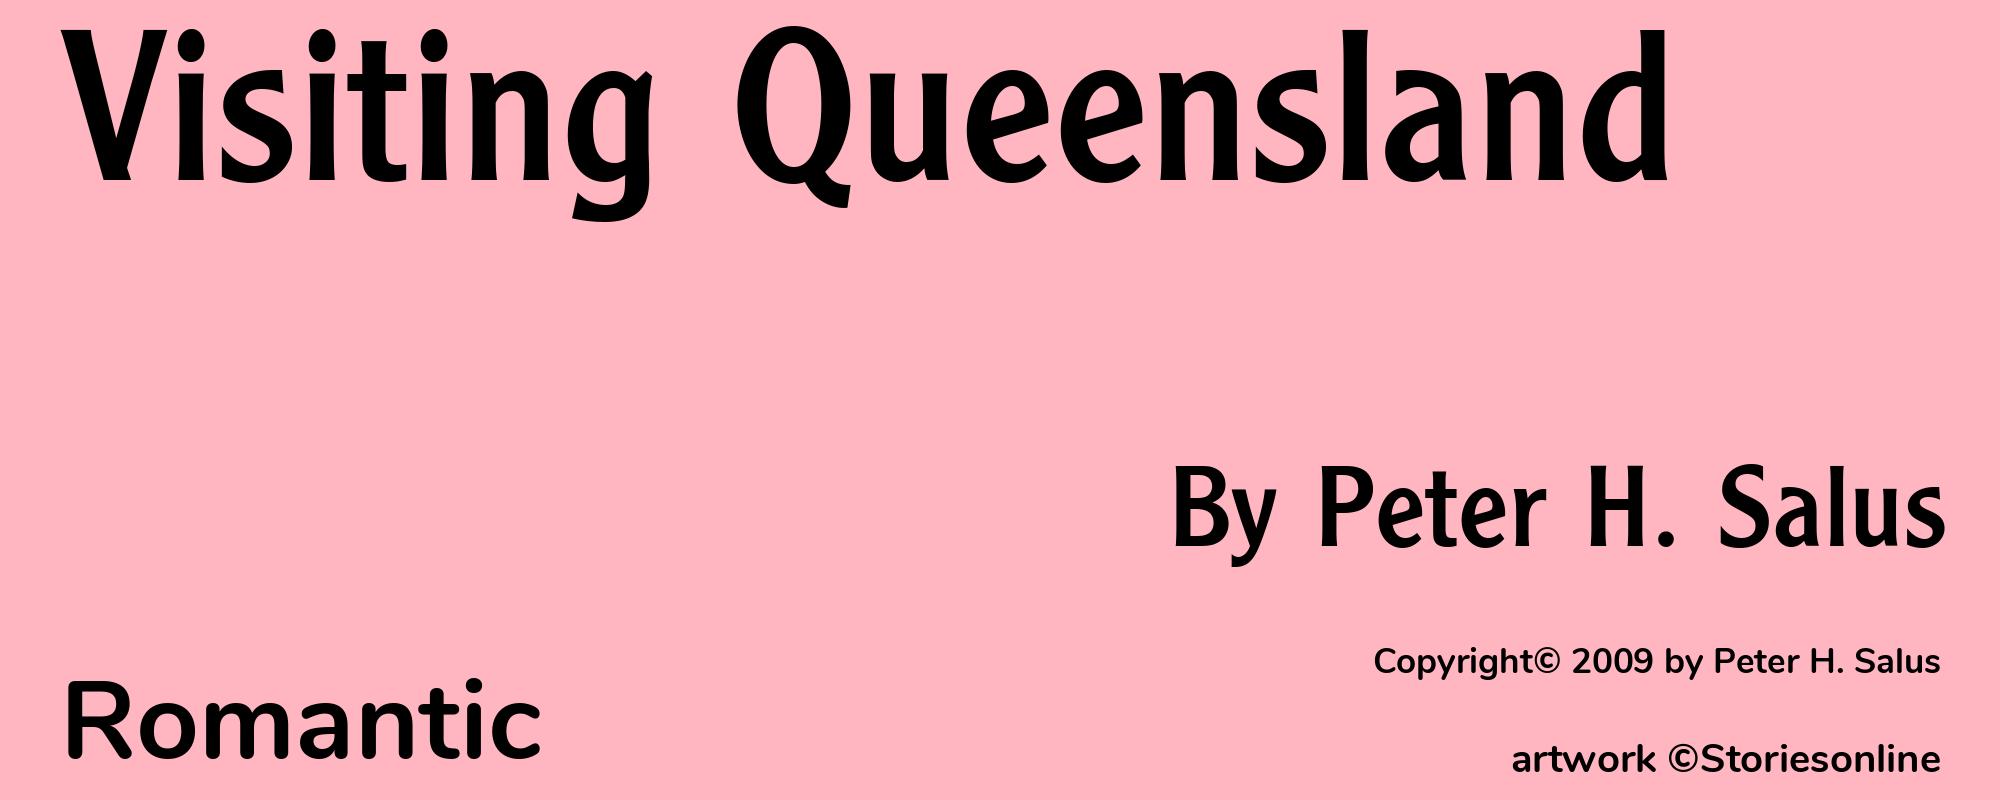 Visiting Queensland - Cover